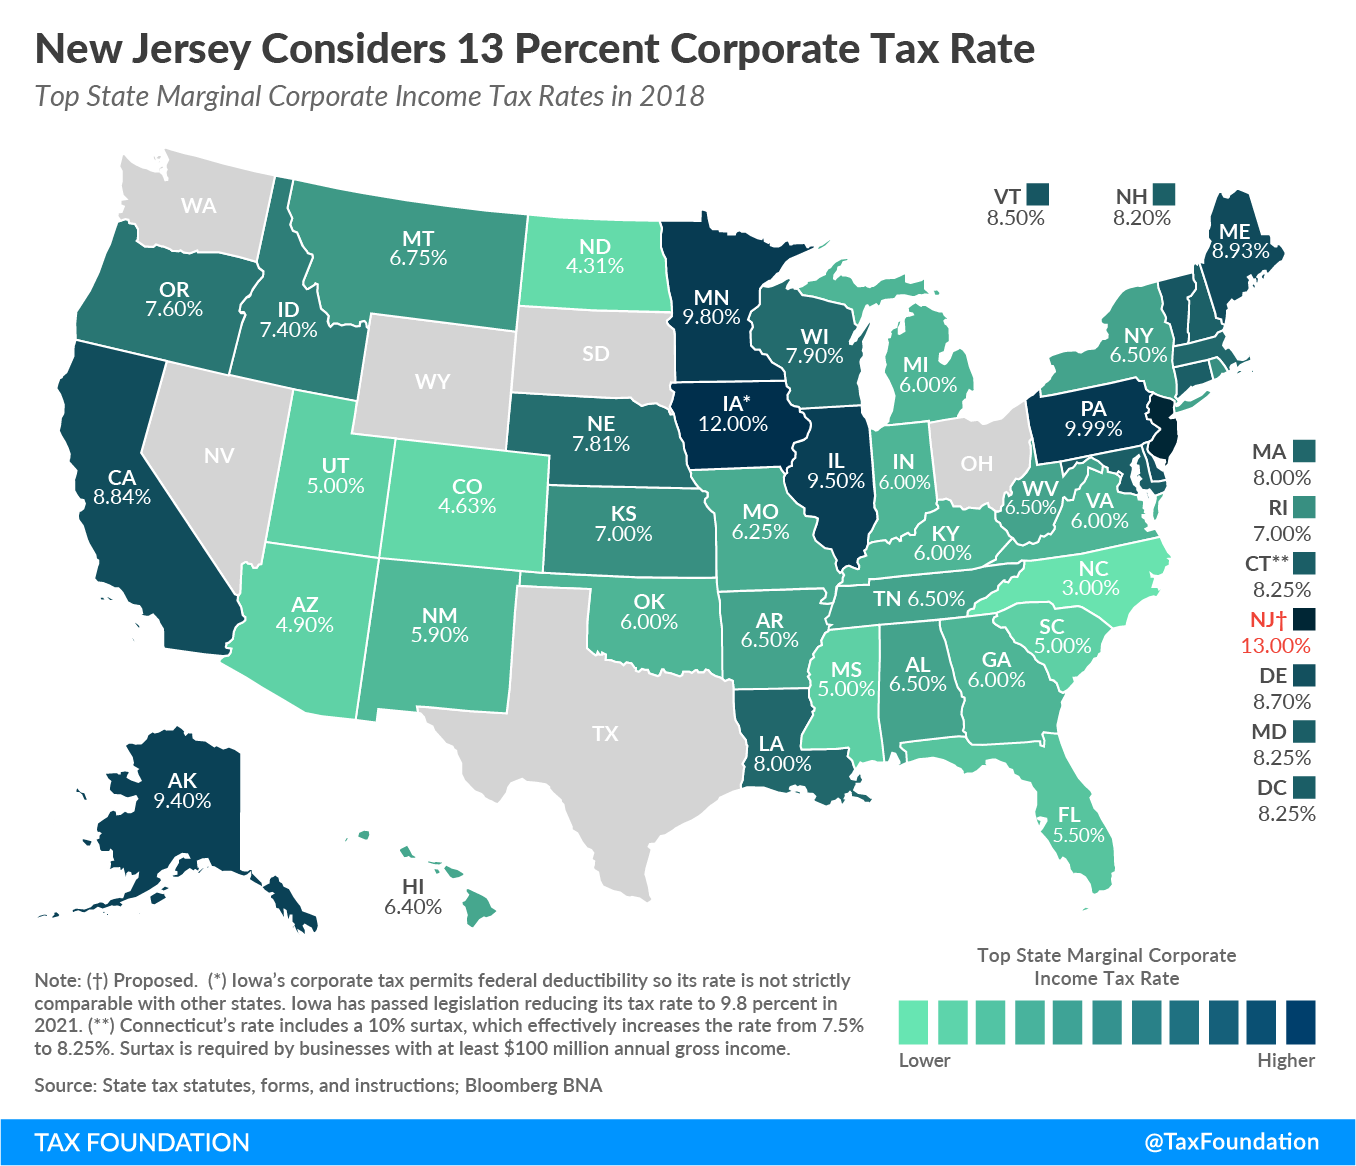 New Jersey Corporate Tax Rate 13%